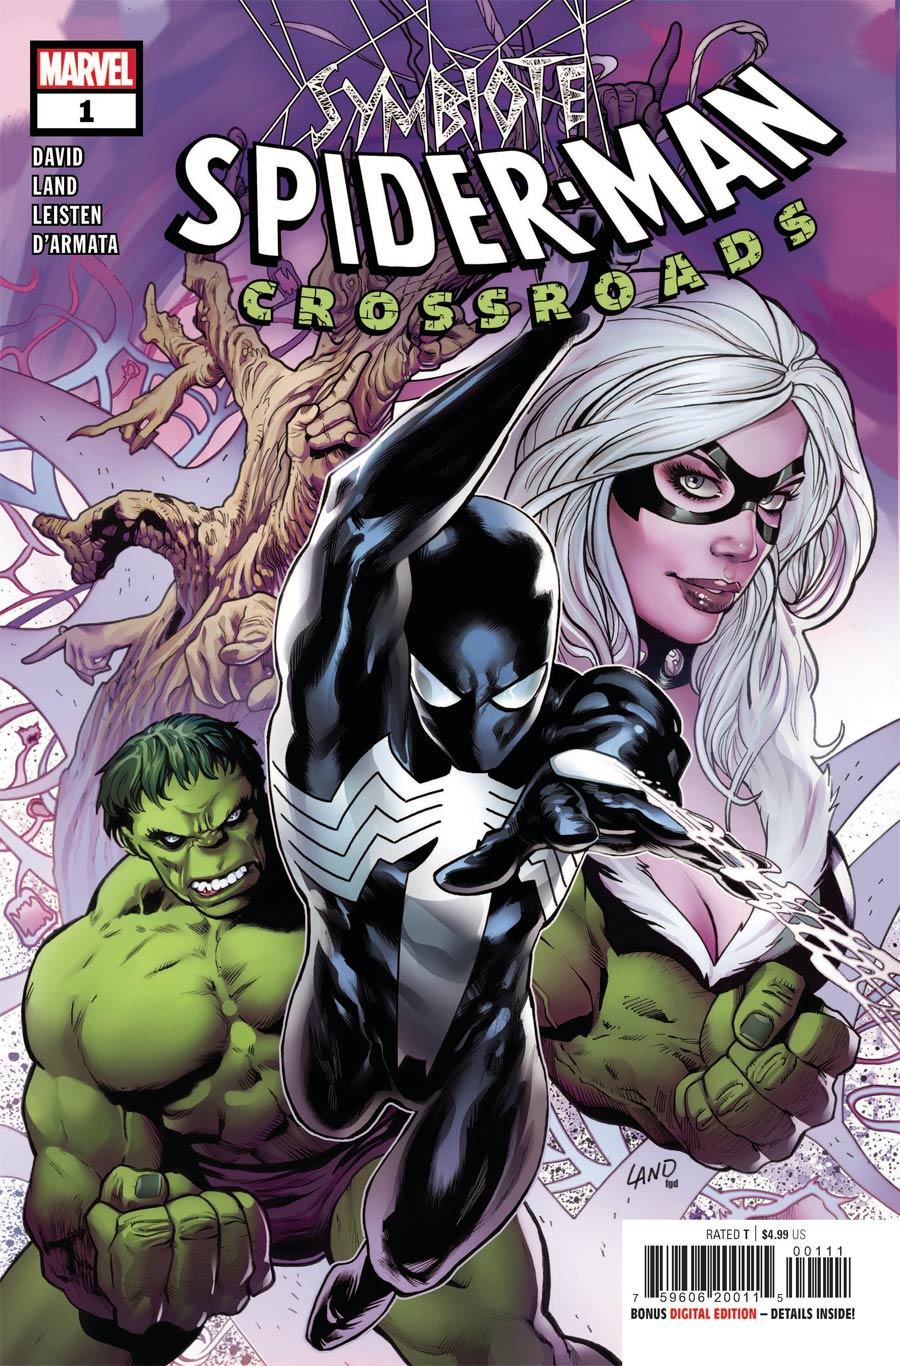 Symbiote Spider-Man Crossroads #1 Cover A Regular Greg Land Cover